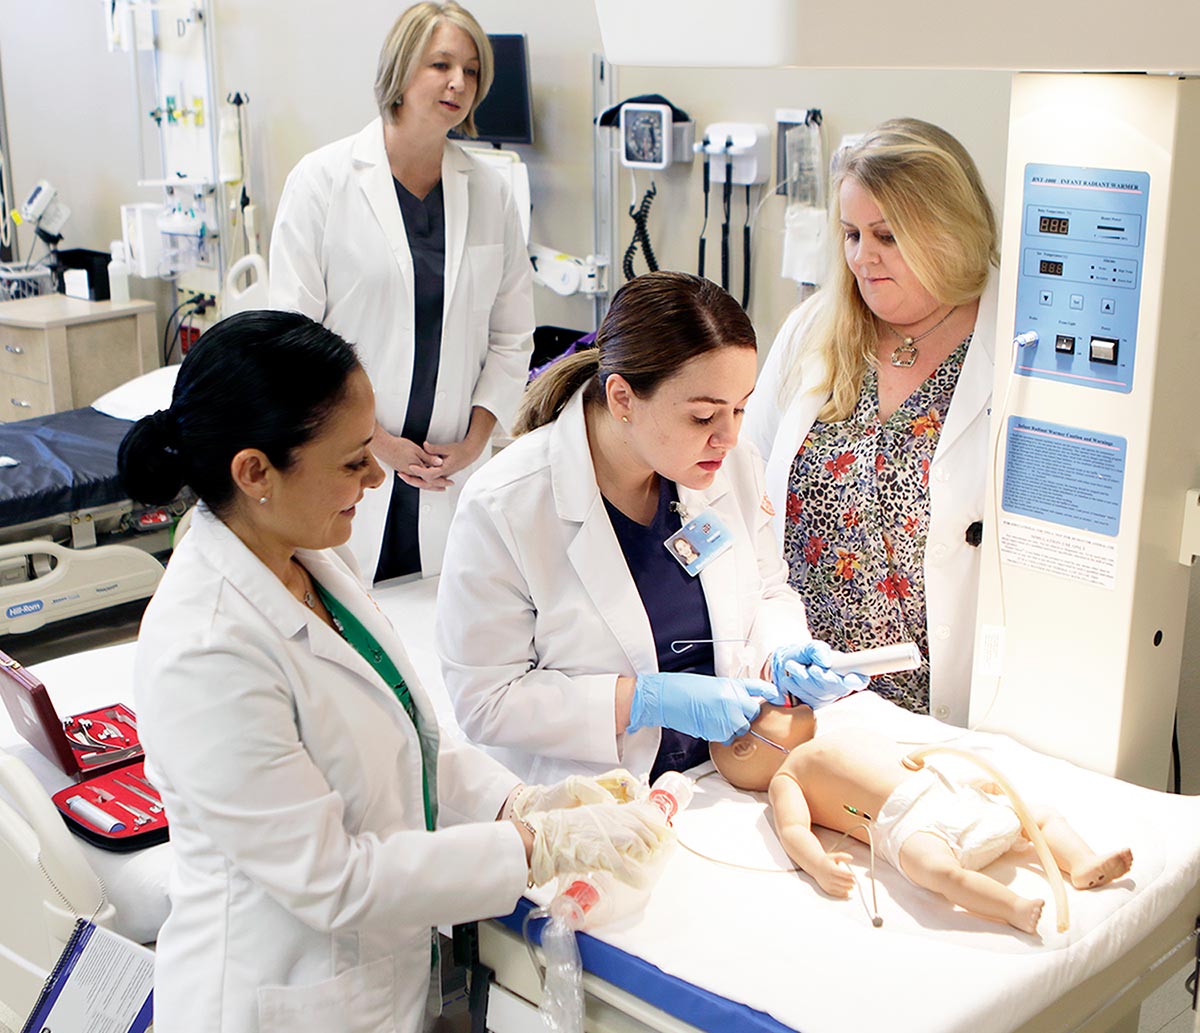 UTEP's School of Nursing will offer the only neonatal concentration for nurse practitioners in West Texas and New Mexico starting in the spring 2022 semester. Photo: Laura Trejo / UTEP Marketing and Communications 